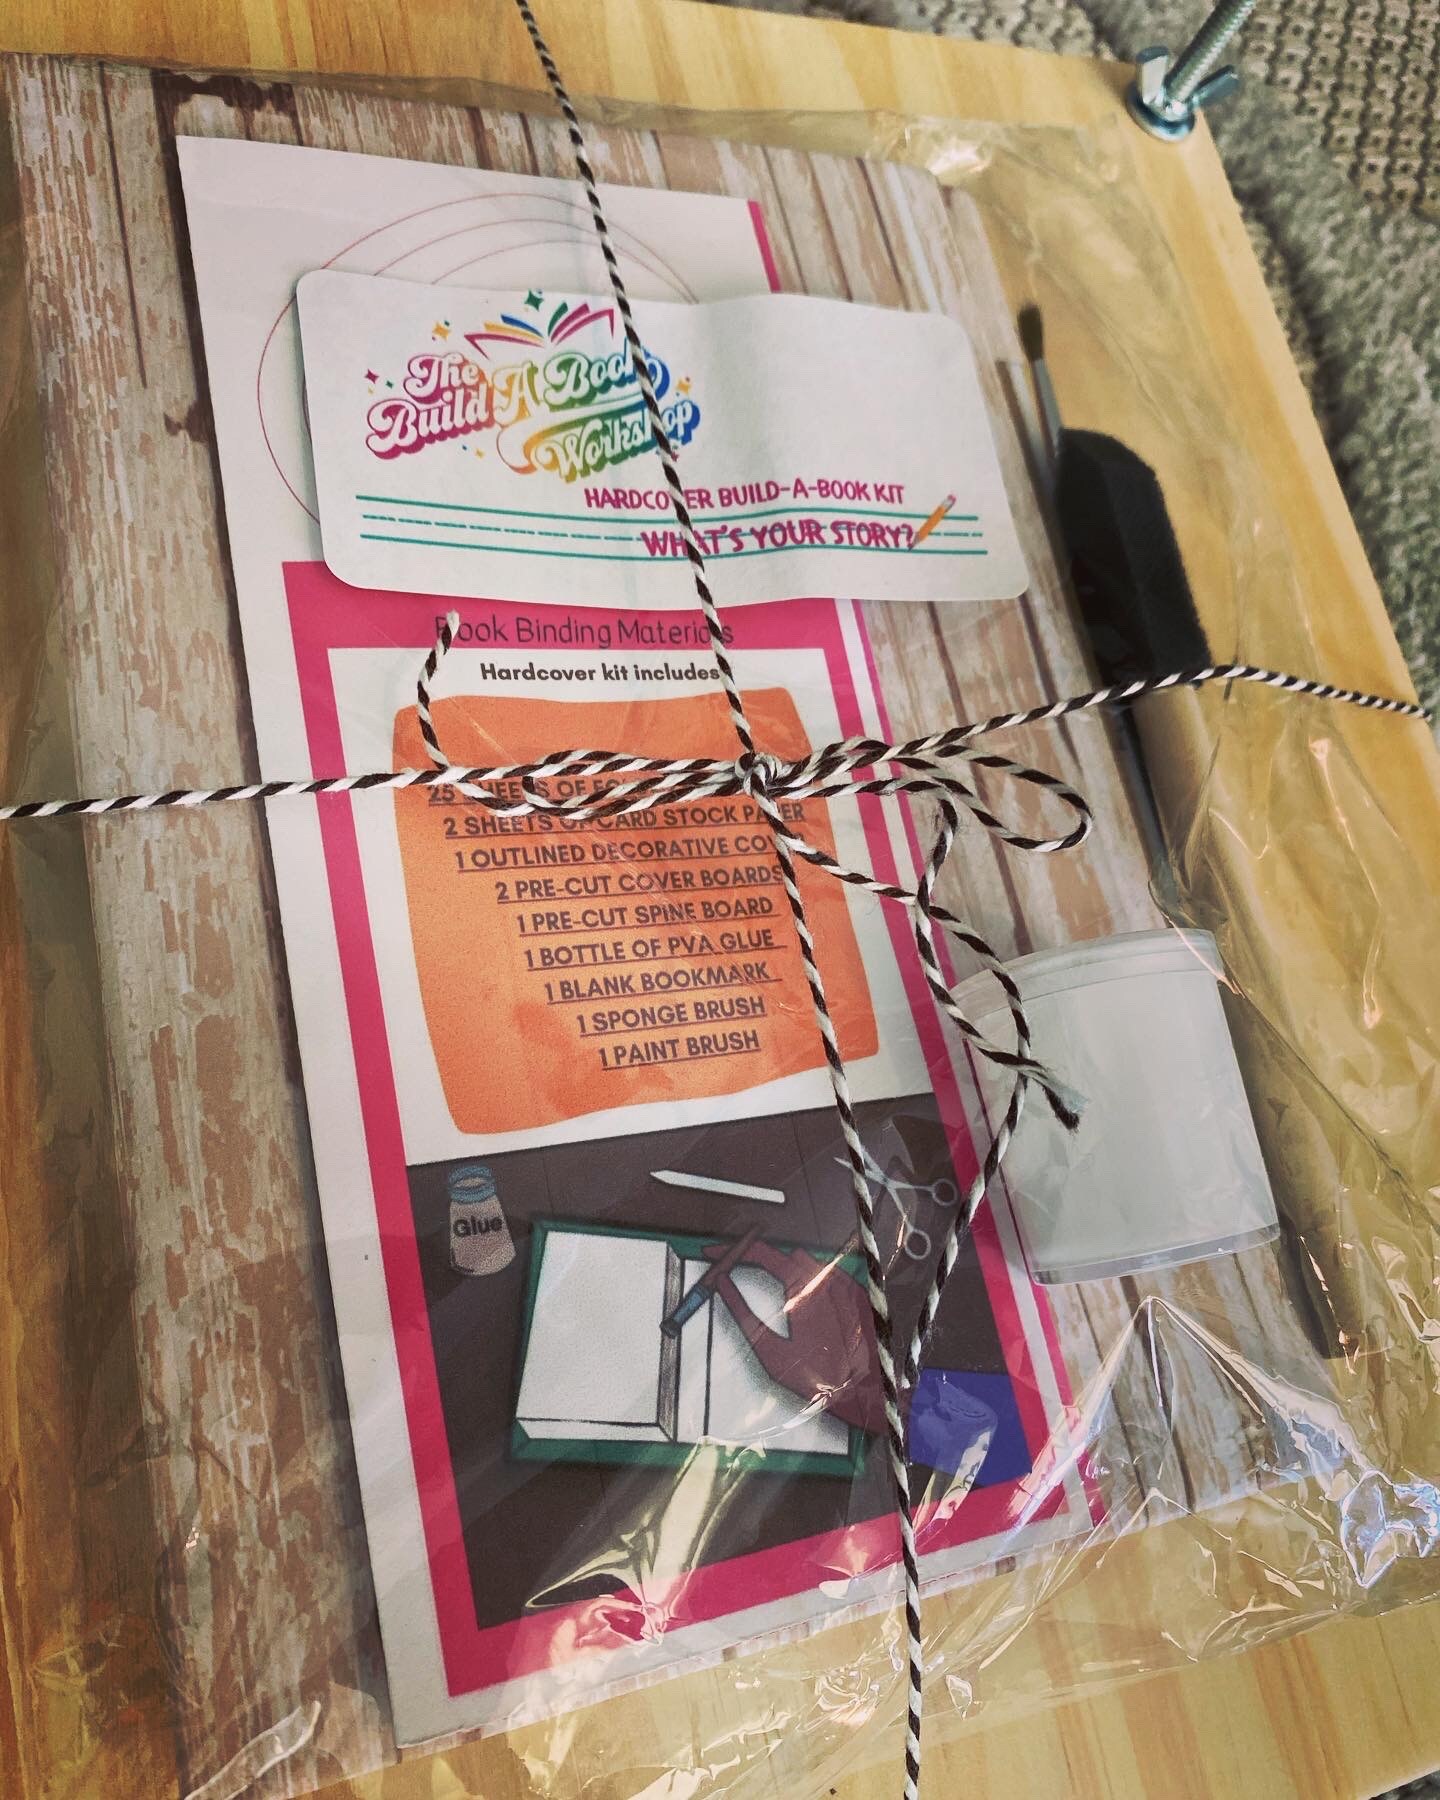 Hardcover book binding kit, make your own hardcover book at home, DIY, arts  and crafts, craft party idea! Tools and instructions included.